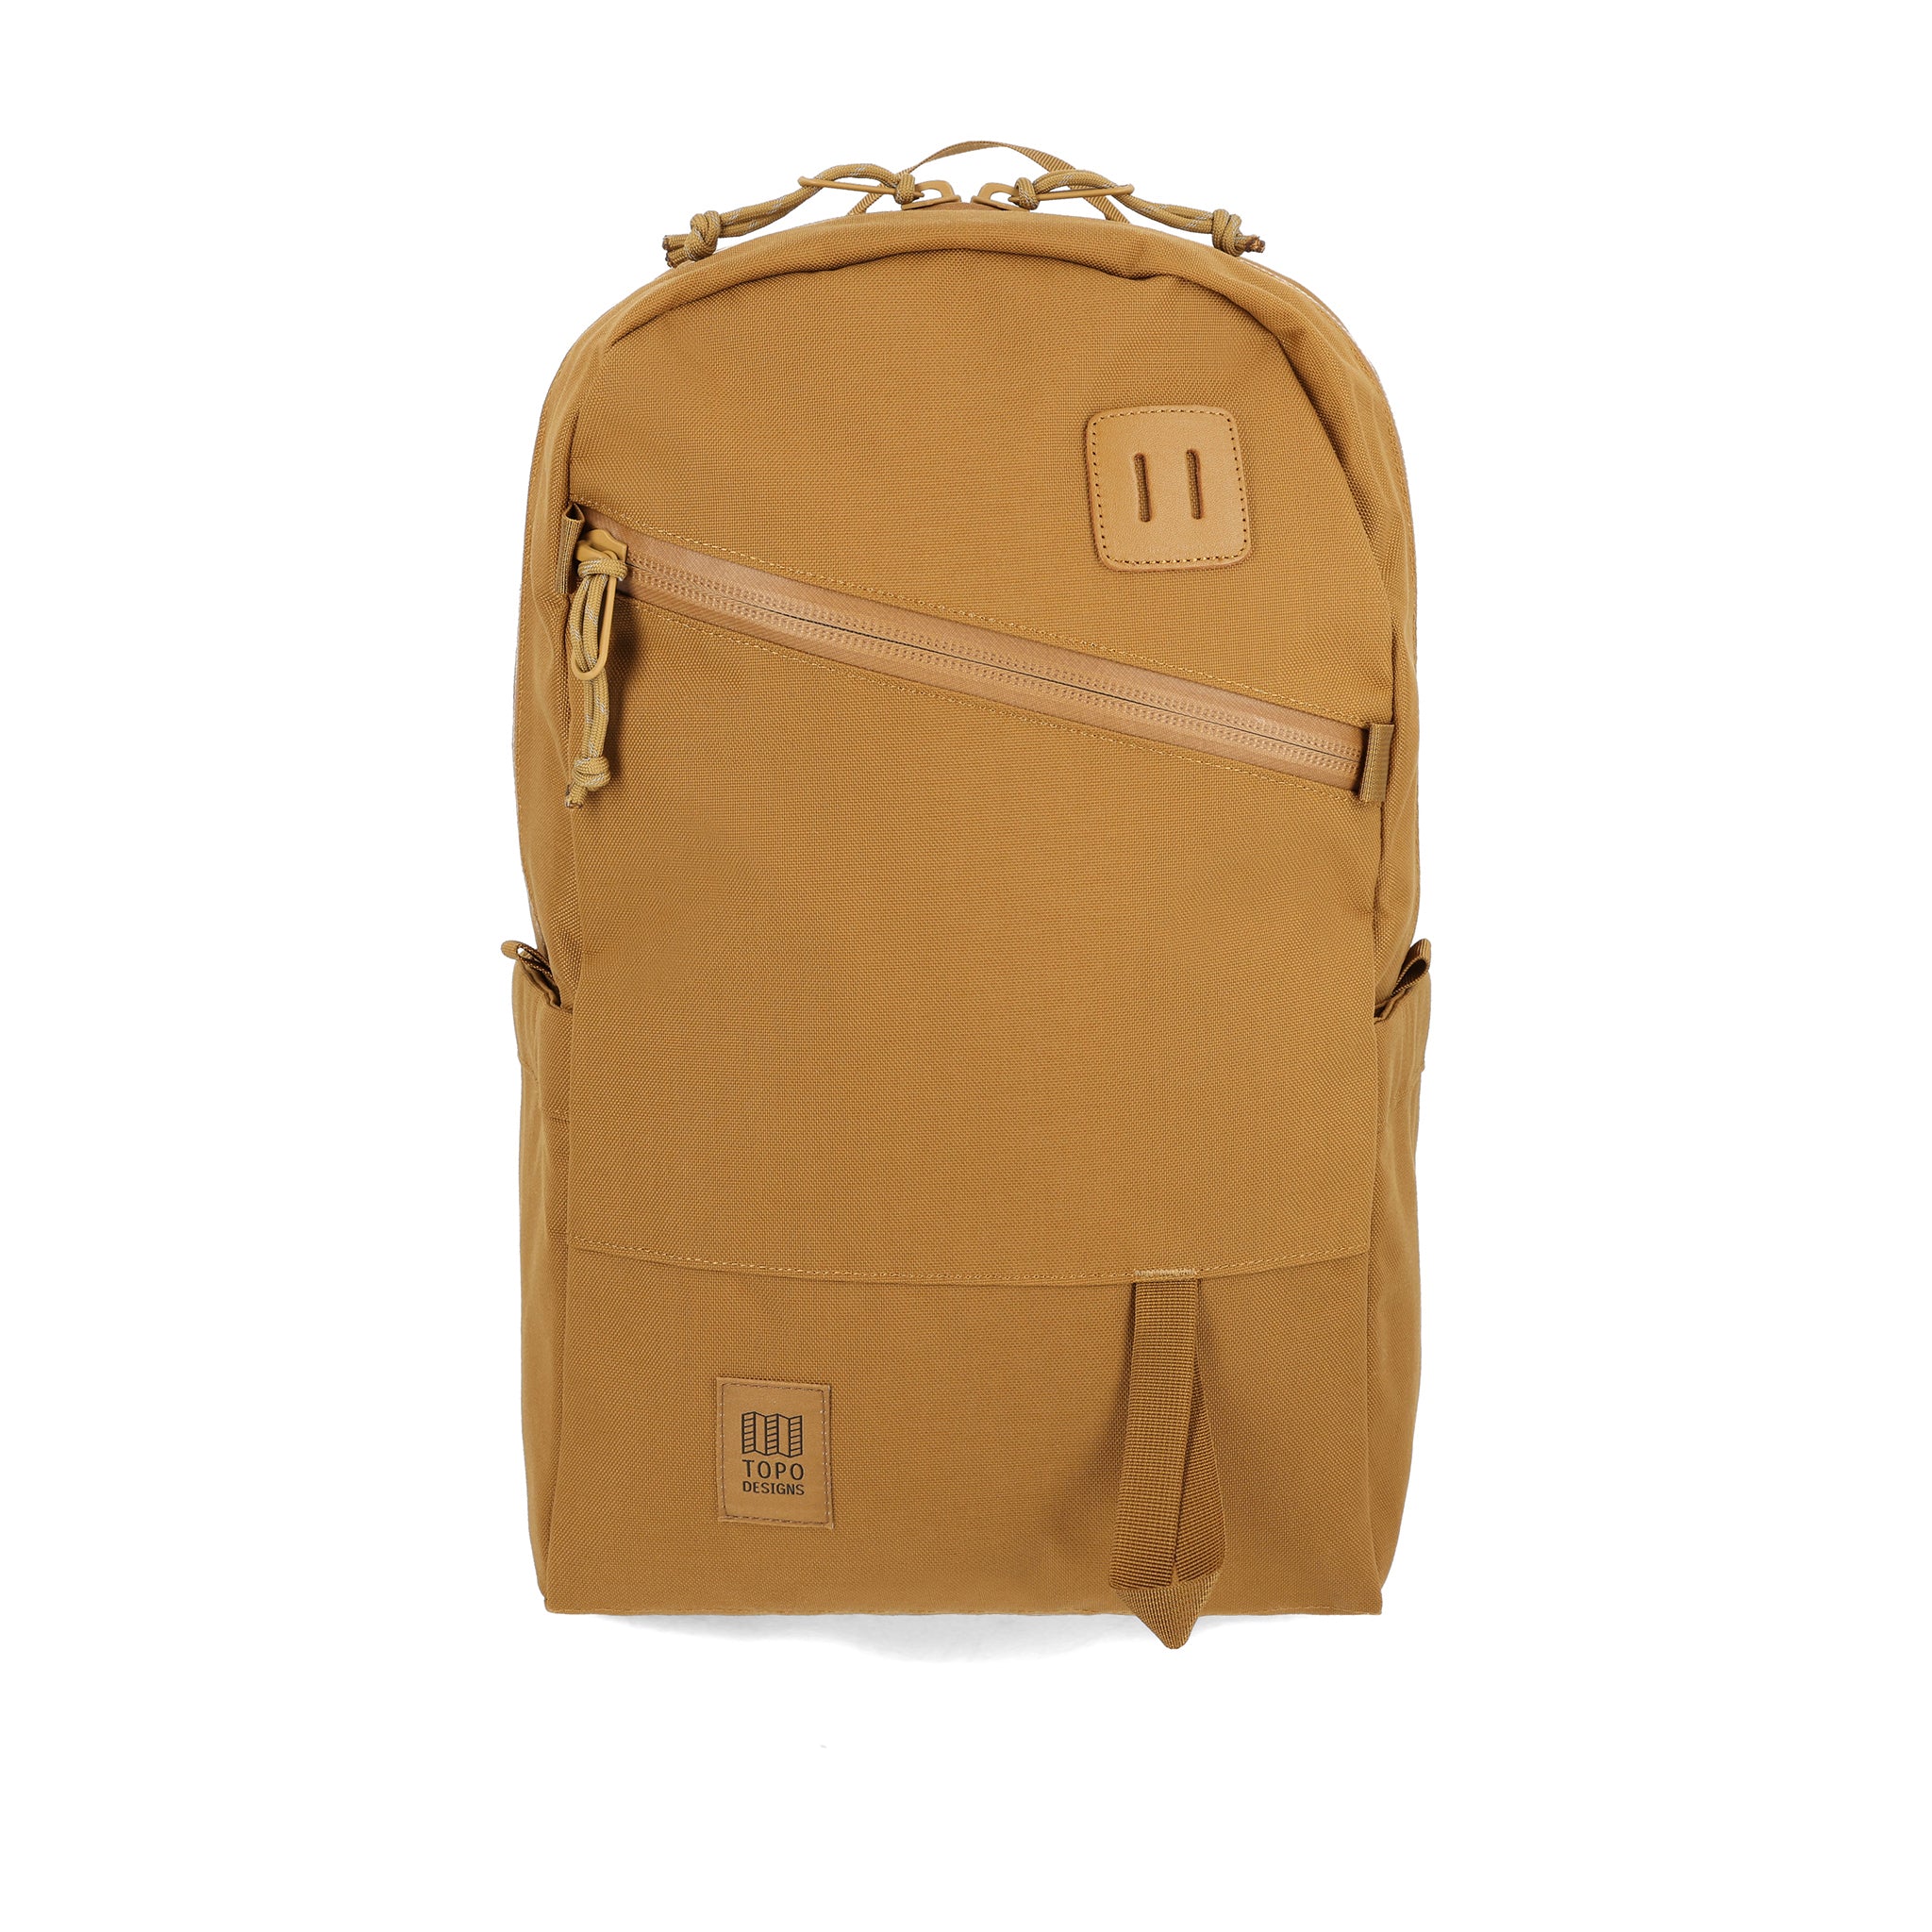 Topo Designs Daypack Tech 100% recycled nylon backpack with external laptop access in "Dark Khaki" brown